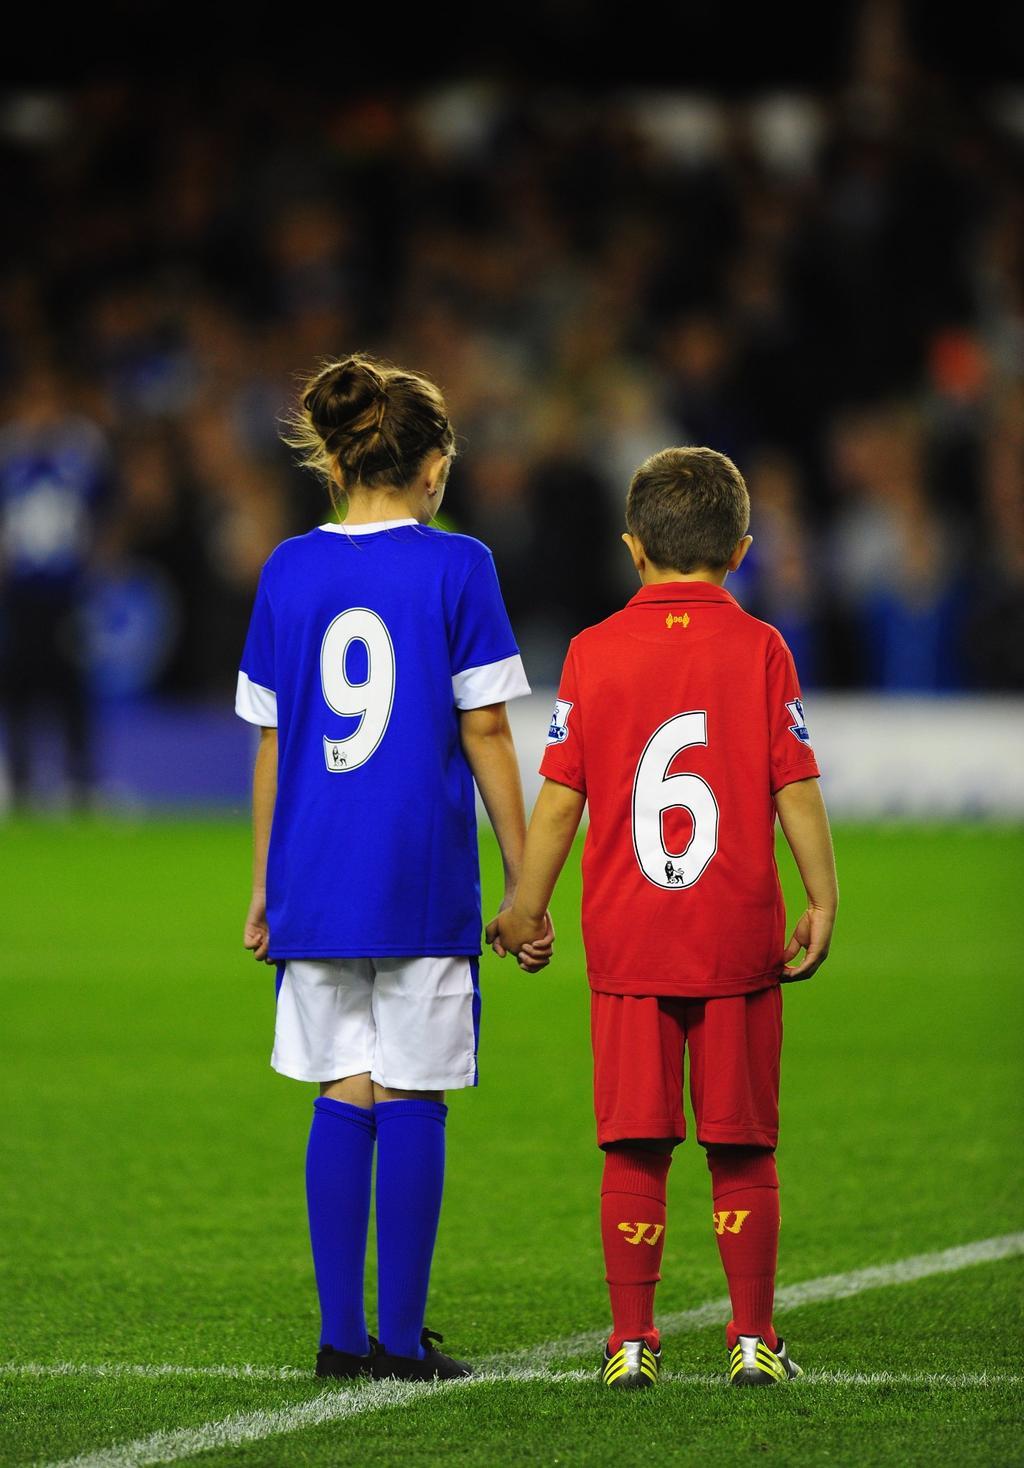 Some things transcend rivalry. At Goodison Park this evening, Everton paid respect to the victims of the Hillsborough disaster with one of classiest gestures we’ve seen. In 1989, 96 Liverpool supporters died as a result of a crush in an overcrowded...